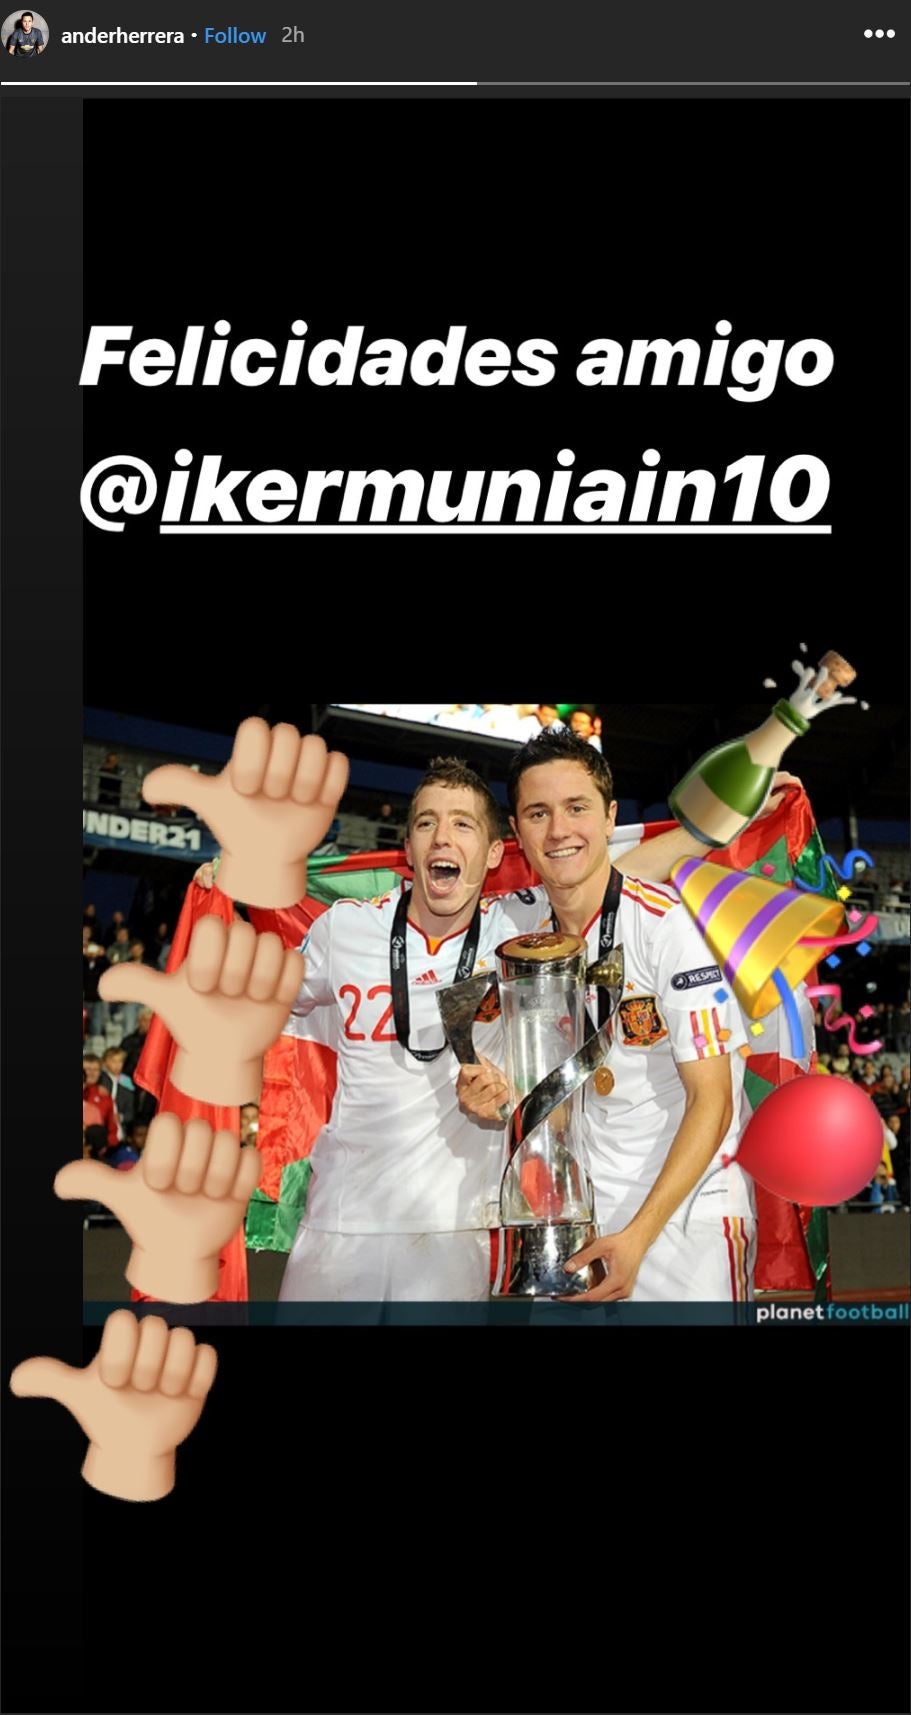 Herrera is the only United player to have posted a message since Tuesday